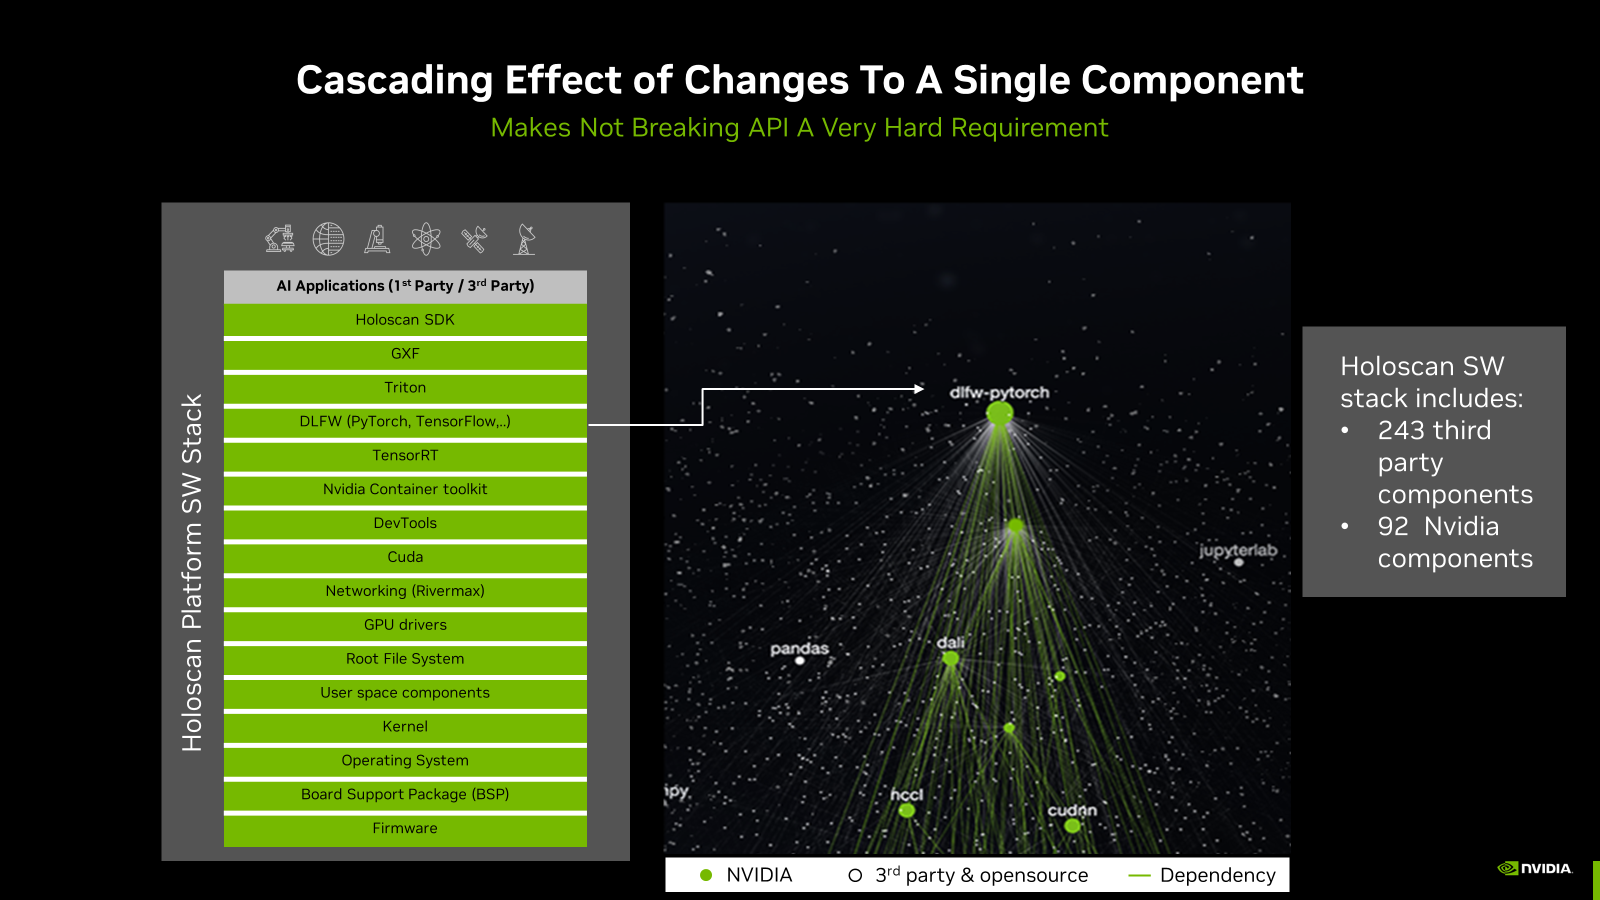 Graphic showing that the NVIDIA Holoscan stack includes 243 third-party components and 92 NVIDIA components.